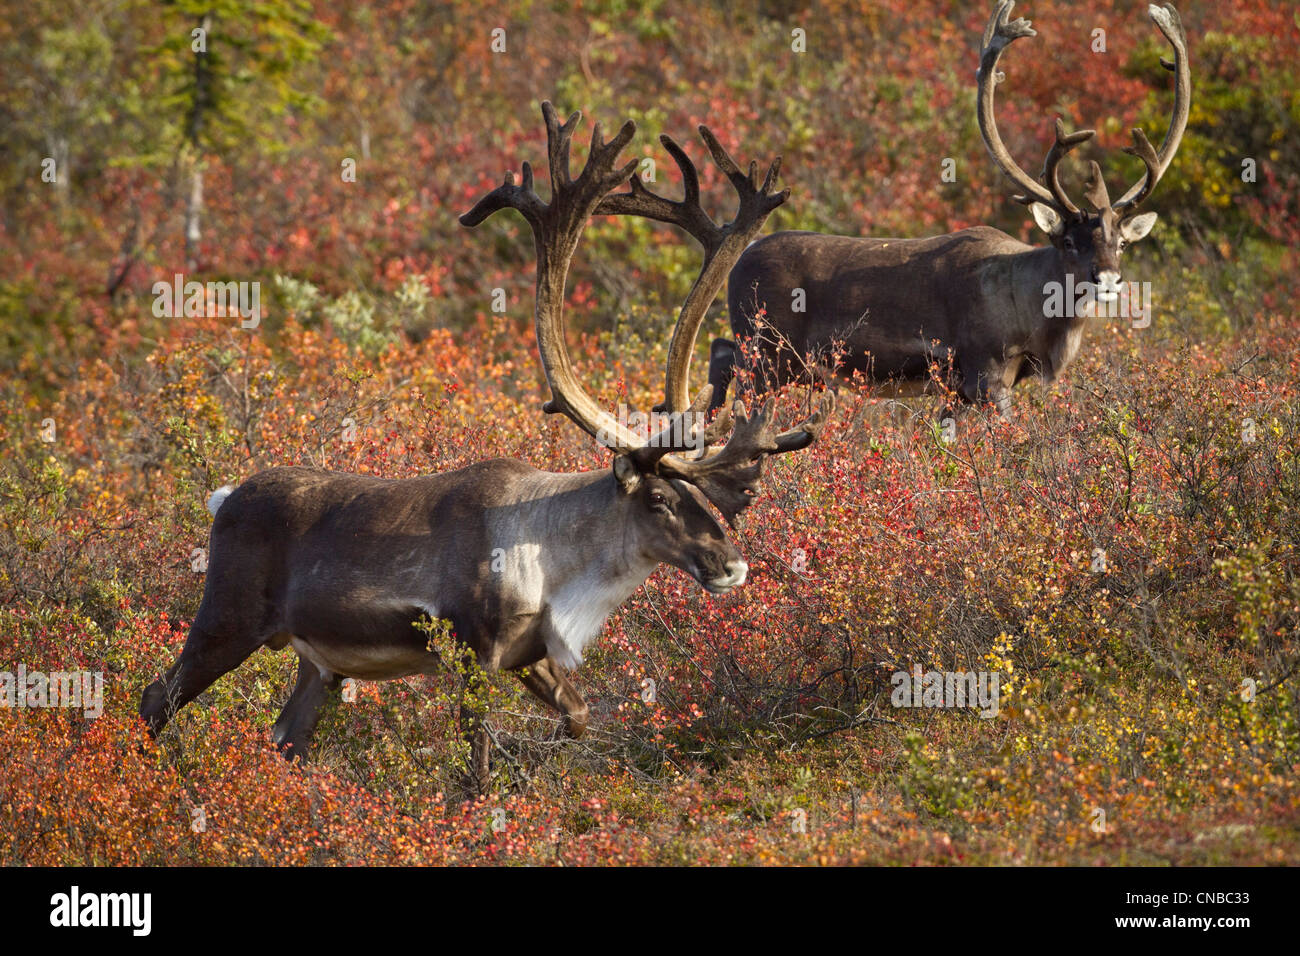 Two bull caribou, with their antlers in velvet, walk thru the colorful foliage of Denali National Park, Interior Alaska, Autumn Stock Photo